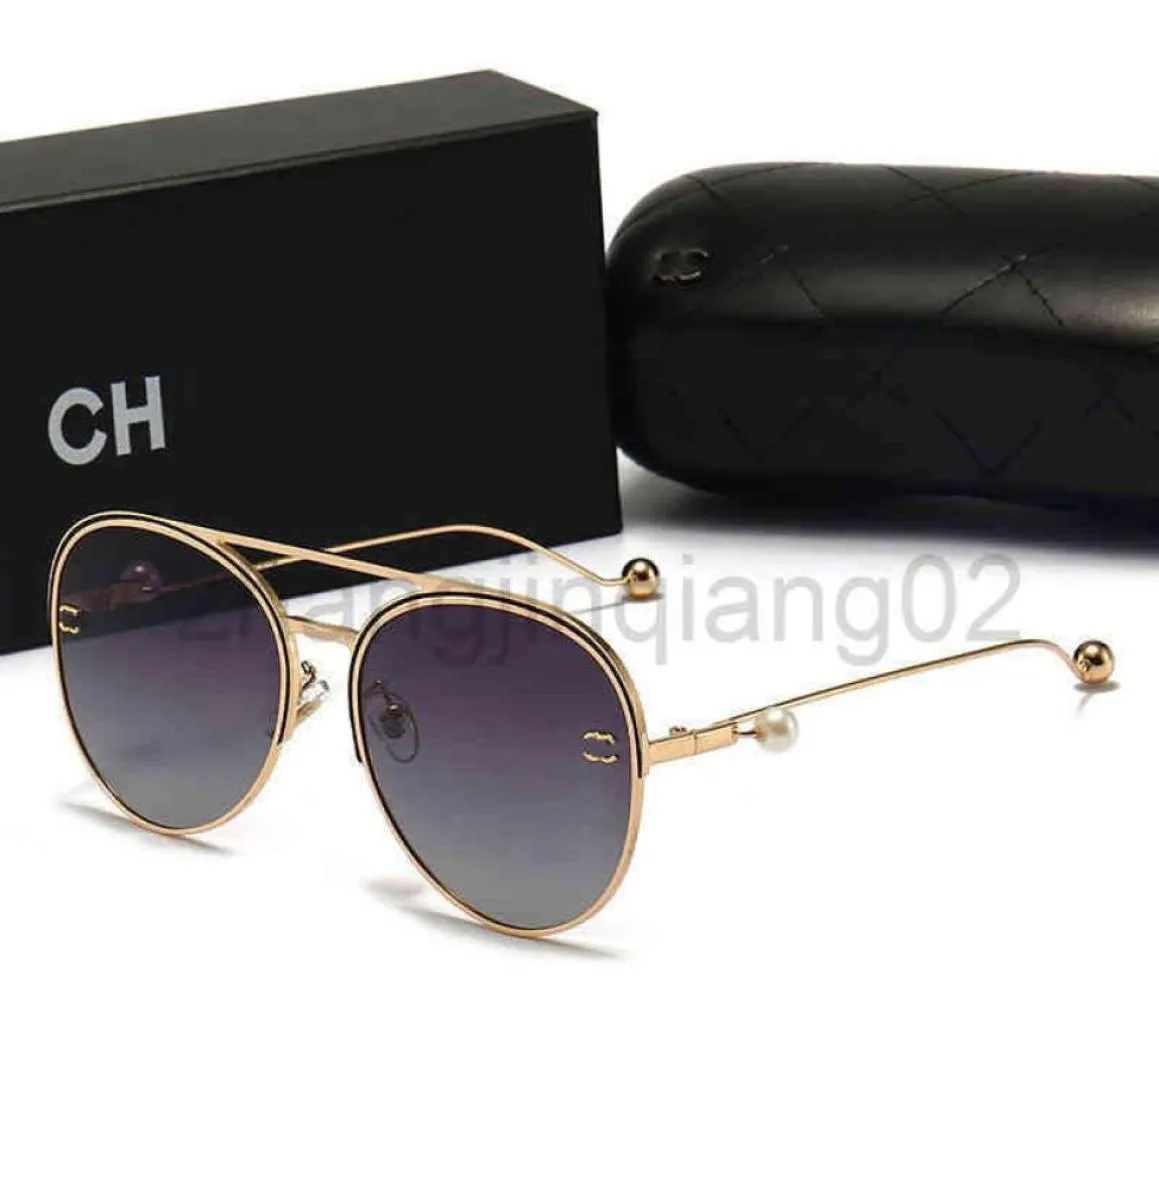 Designer Sunglass Cycle Luxurious Casual Fashion Woman Mens New C Family Round Slim Trend Personnalisé Travel Vintage Baseball Sport Sun Glasshes1953625